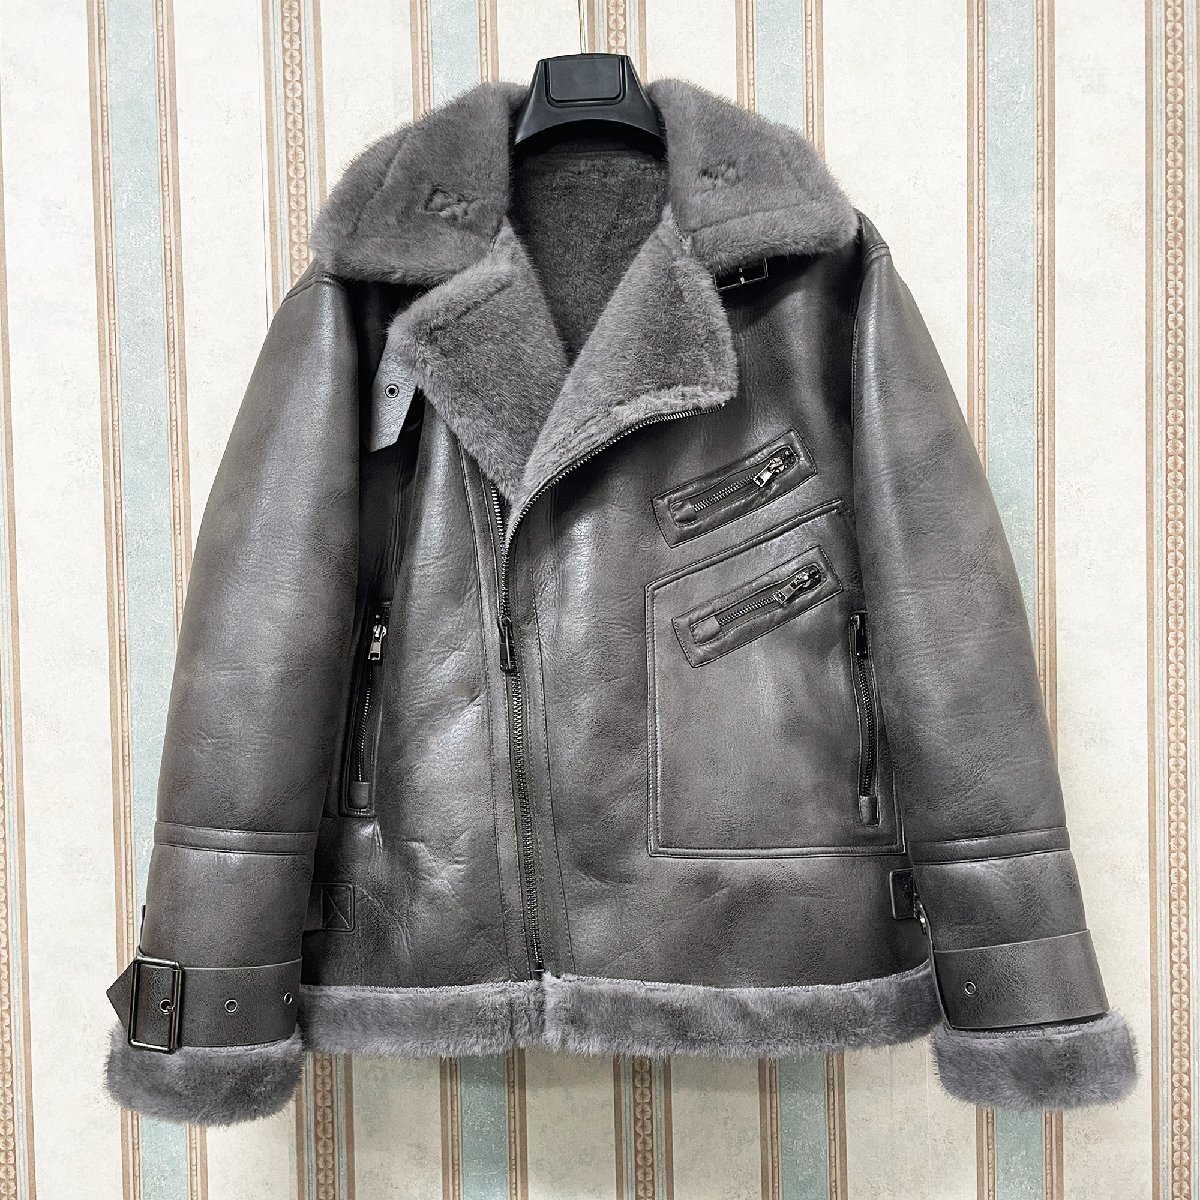  top class regular price 15 ten thousand FRANKLIN MUSK* America * New York departure leather jacket boma- high class sheepskin original leather -ply thickness protection against cold Rider's bike size 2